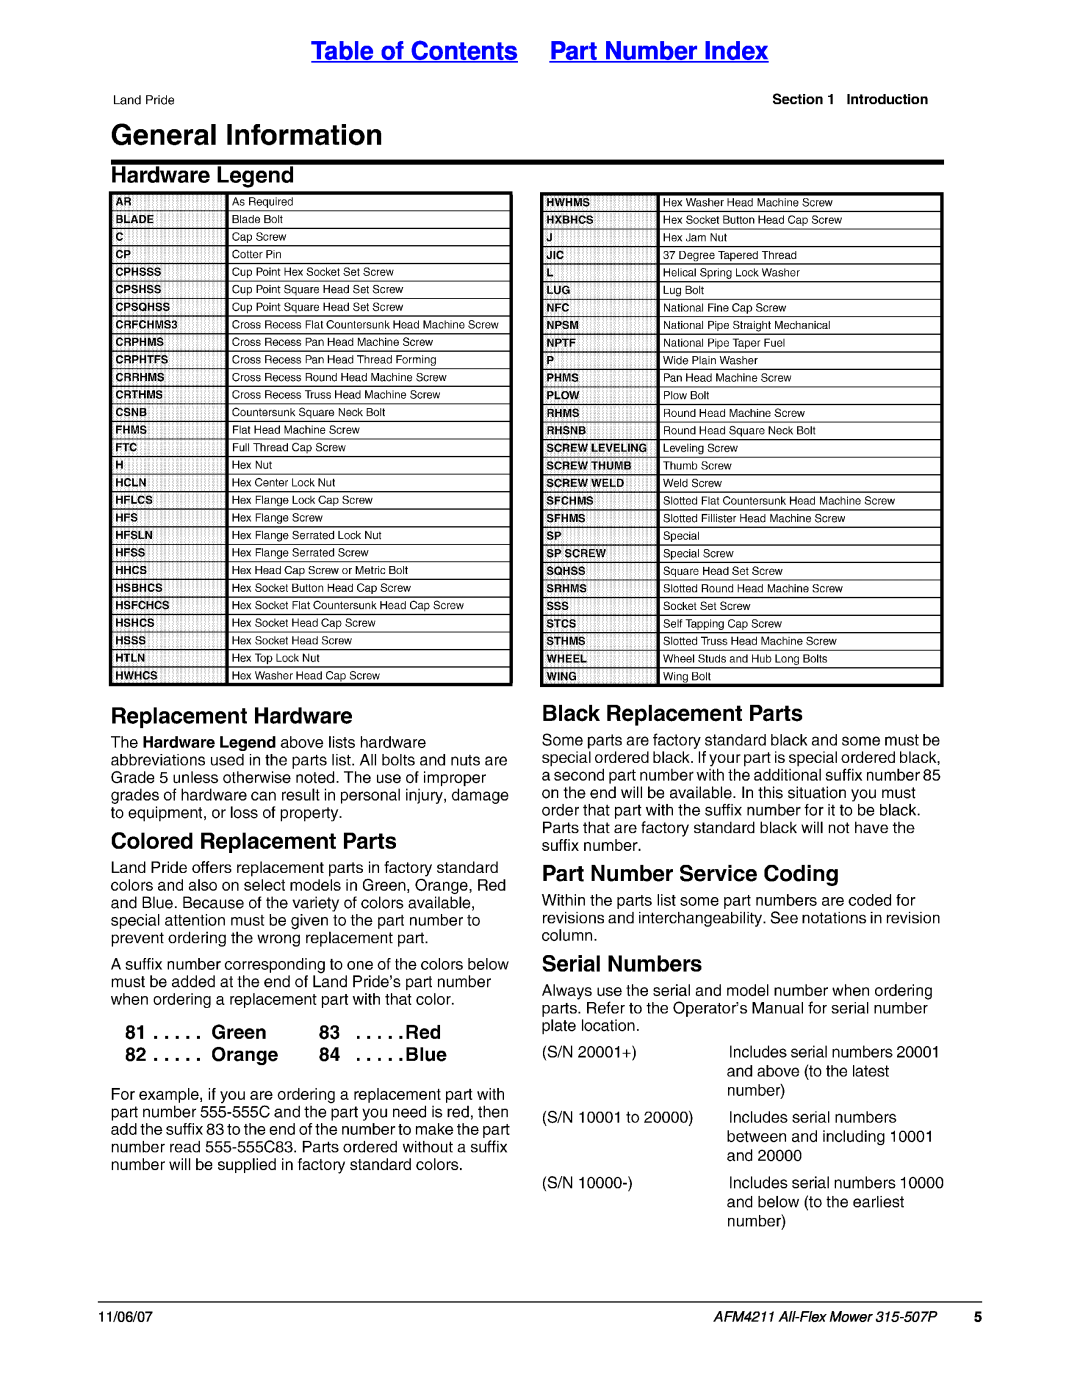 Land Pride All-Flex Mower manual Table of Contents Part Number Index, AFM4211 All-FlexMower 315-507P, 11/06/07 